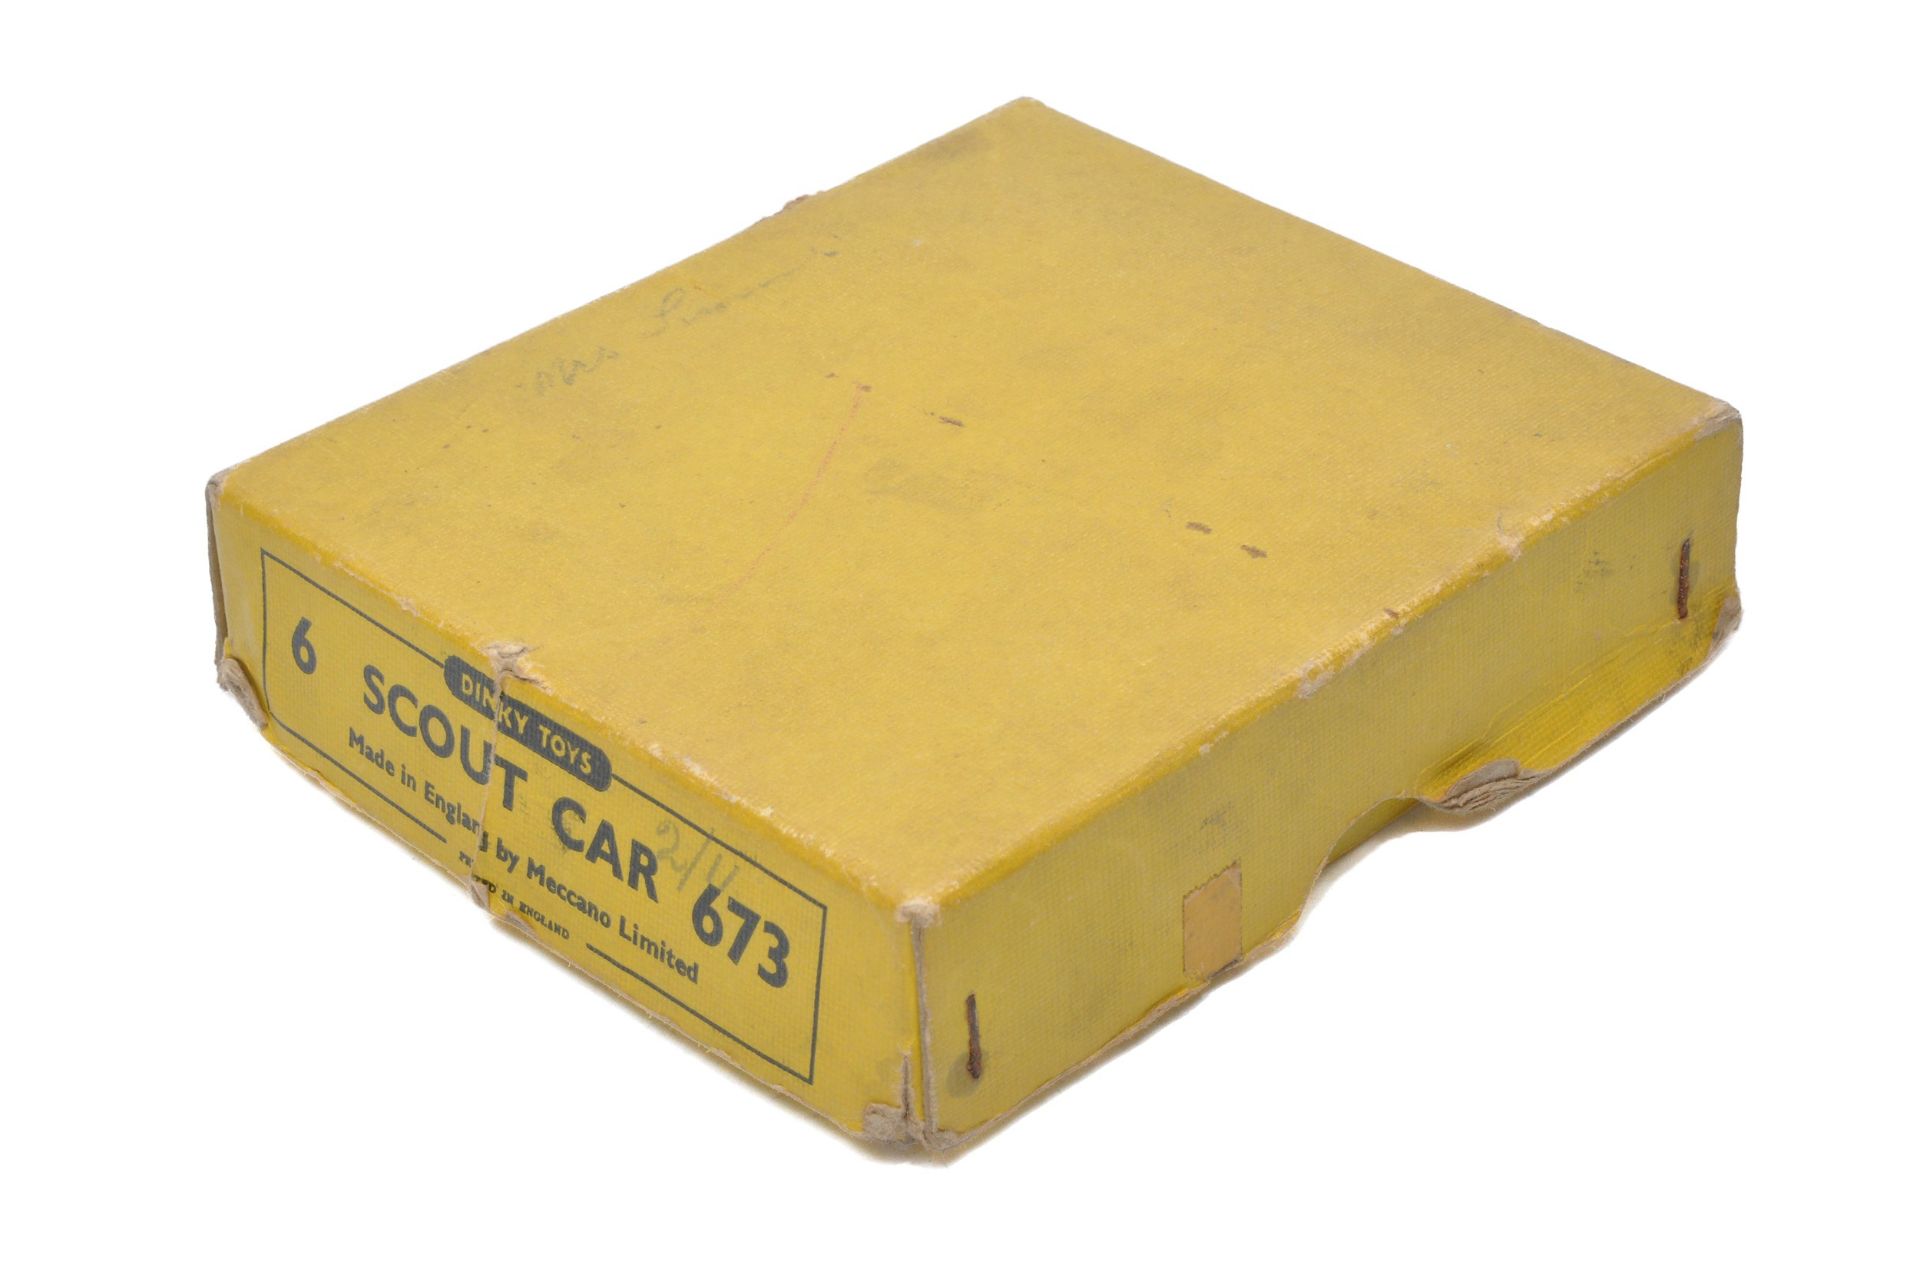 Dinky No. 673 Scout Car Trade Box. Fair to good, no dividers.